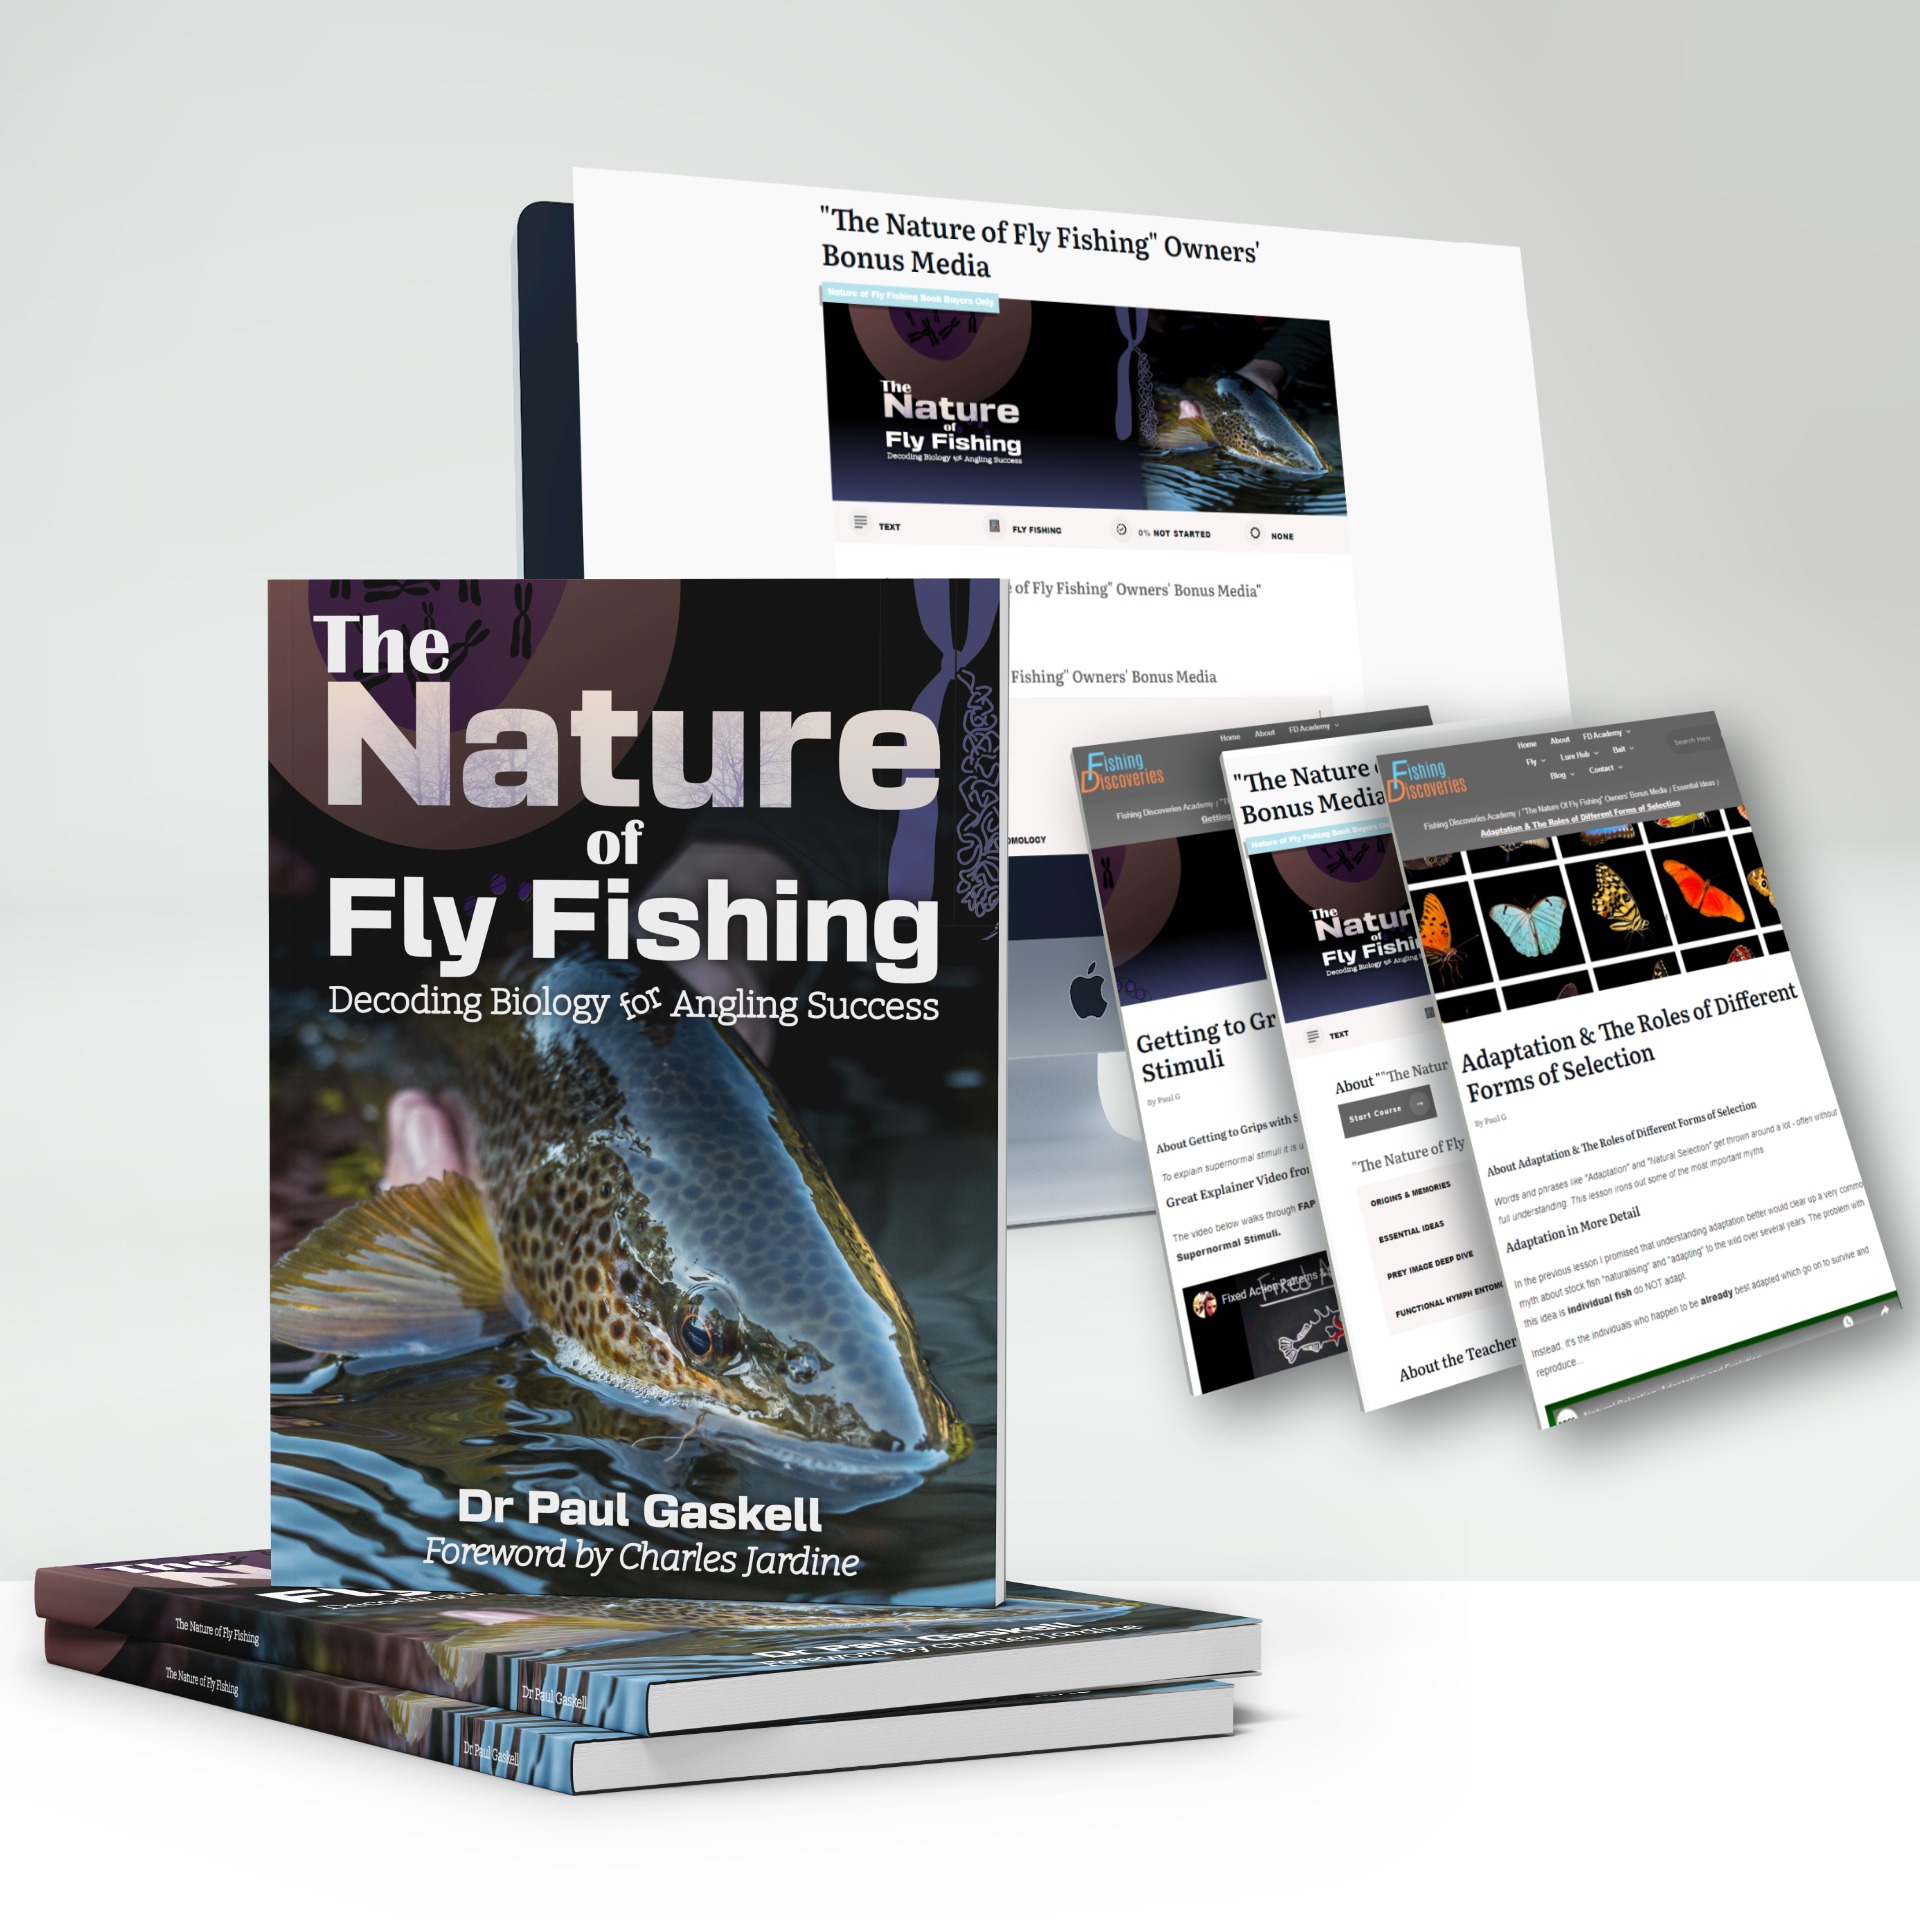 The Nature of Fly Fishing Book by Paul Gaskell